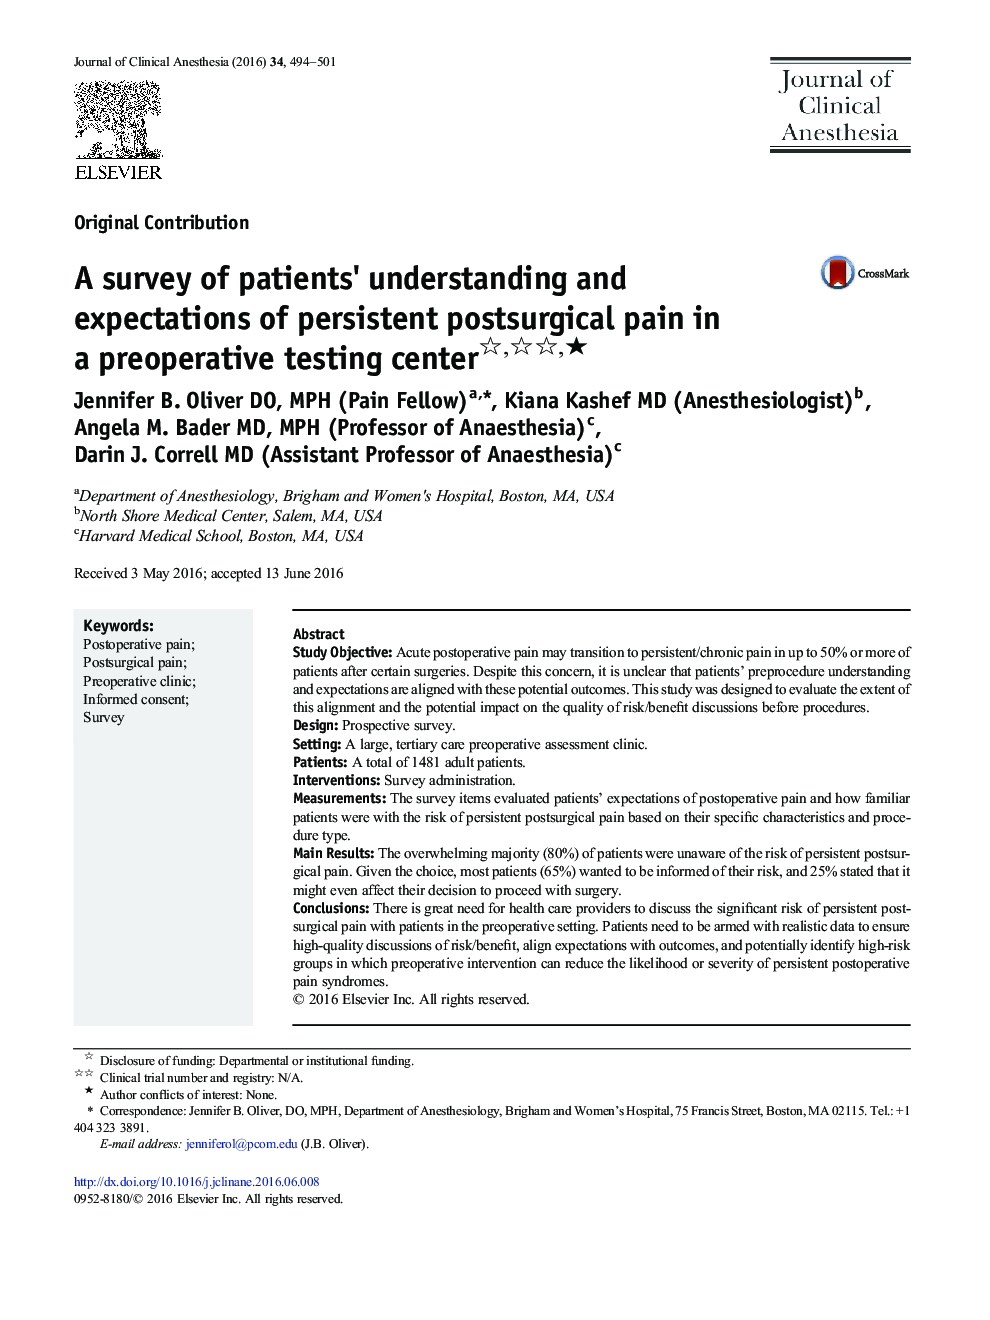 Original ContributionA survey of patients' understanding and expectations of persistent postsurgical pain in a preoperative testing centerâ